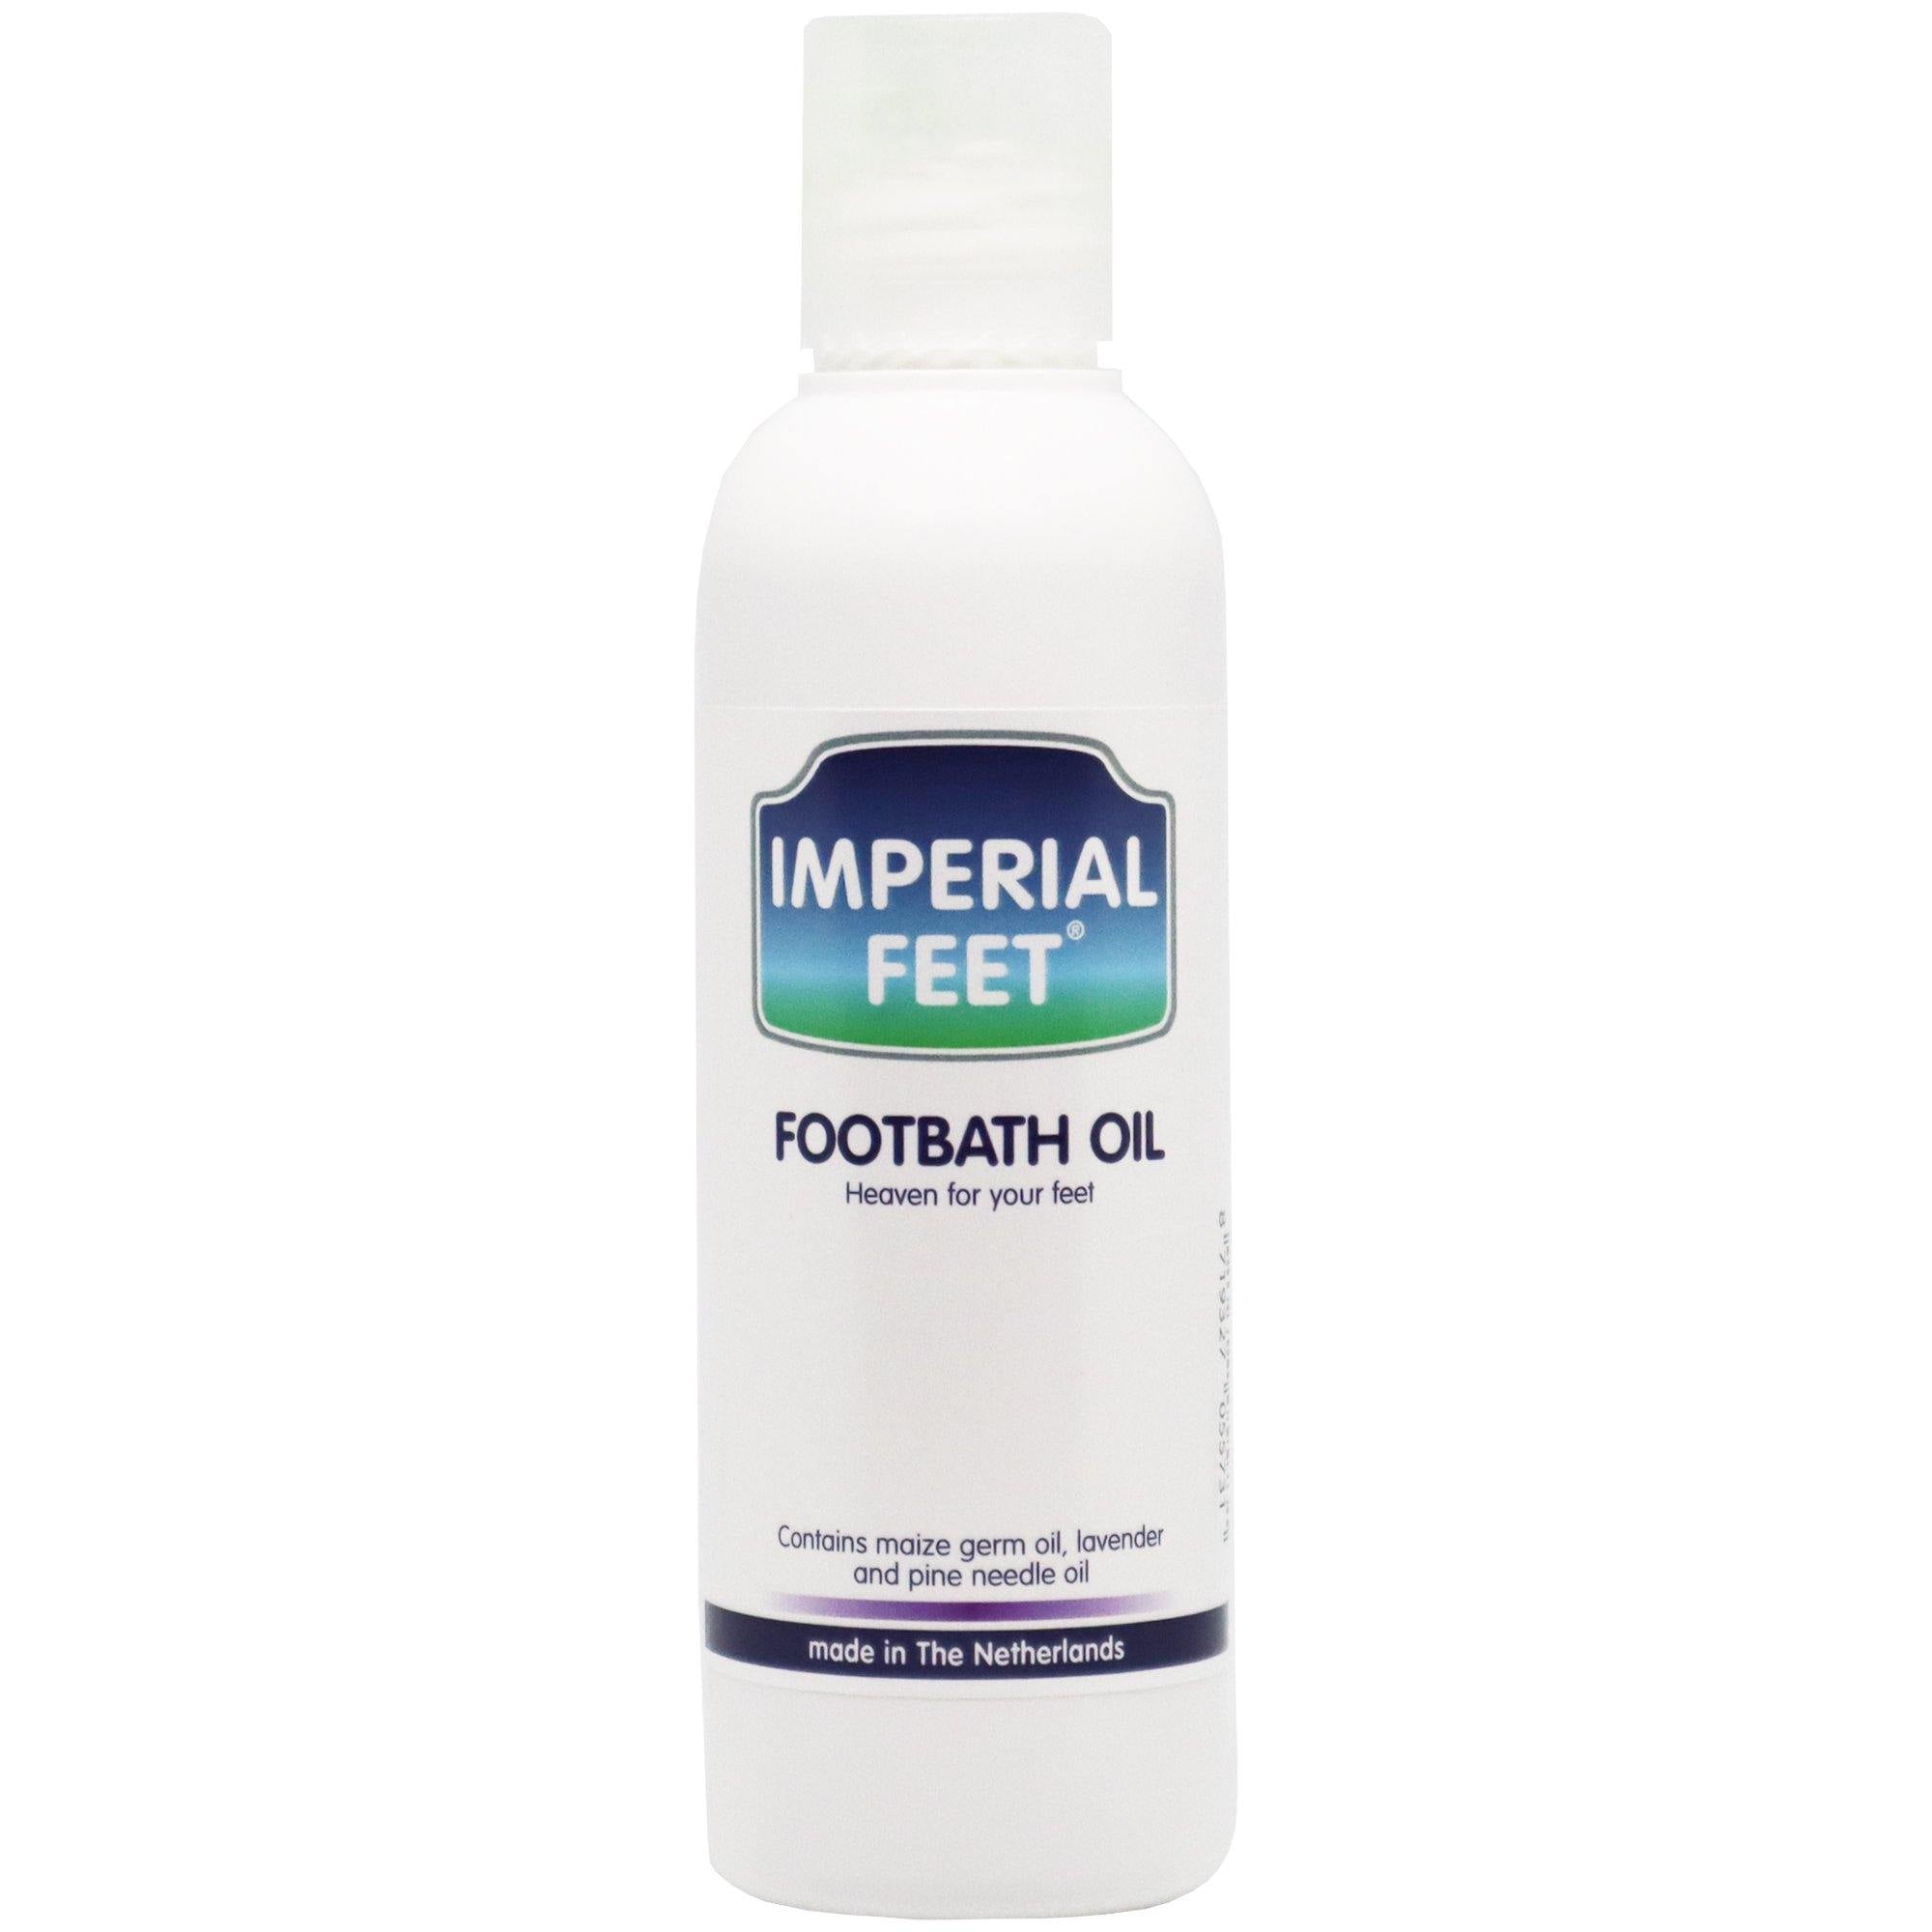 Footbath Oil - Imperial Feet - Foot care products - B2C, Extra Care